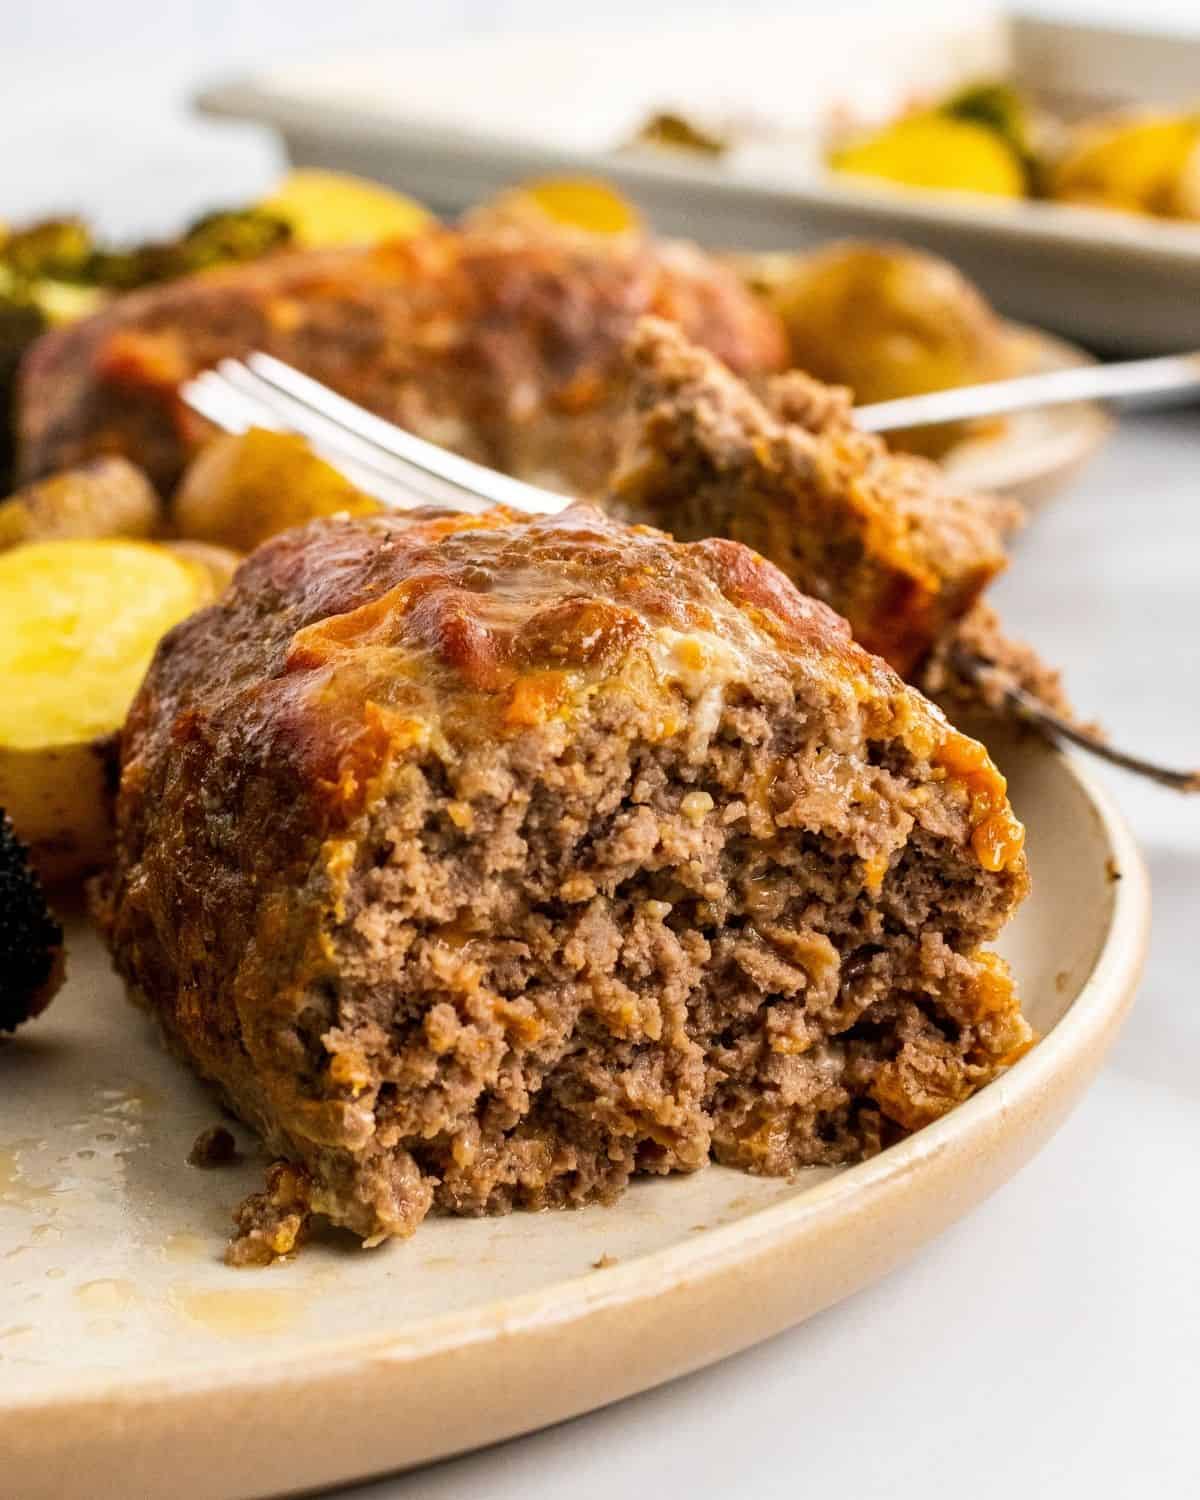 close up of a small meatloaf cut in half on a plate with potatoes.